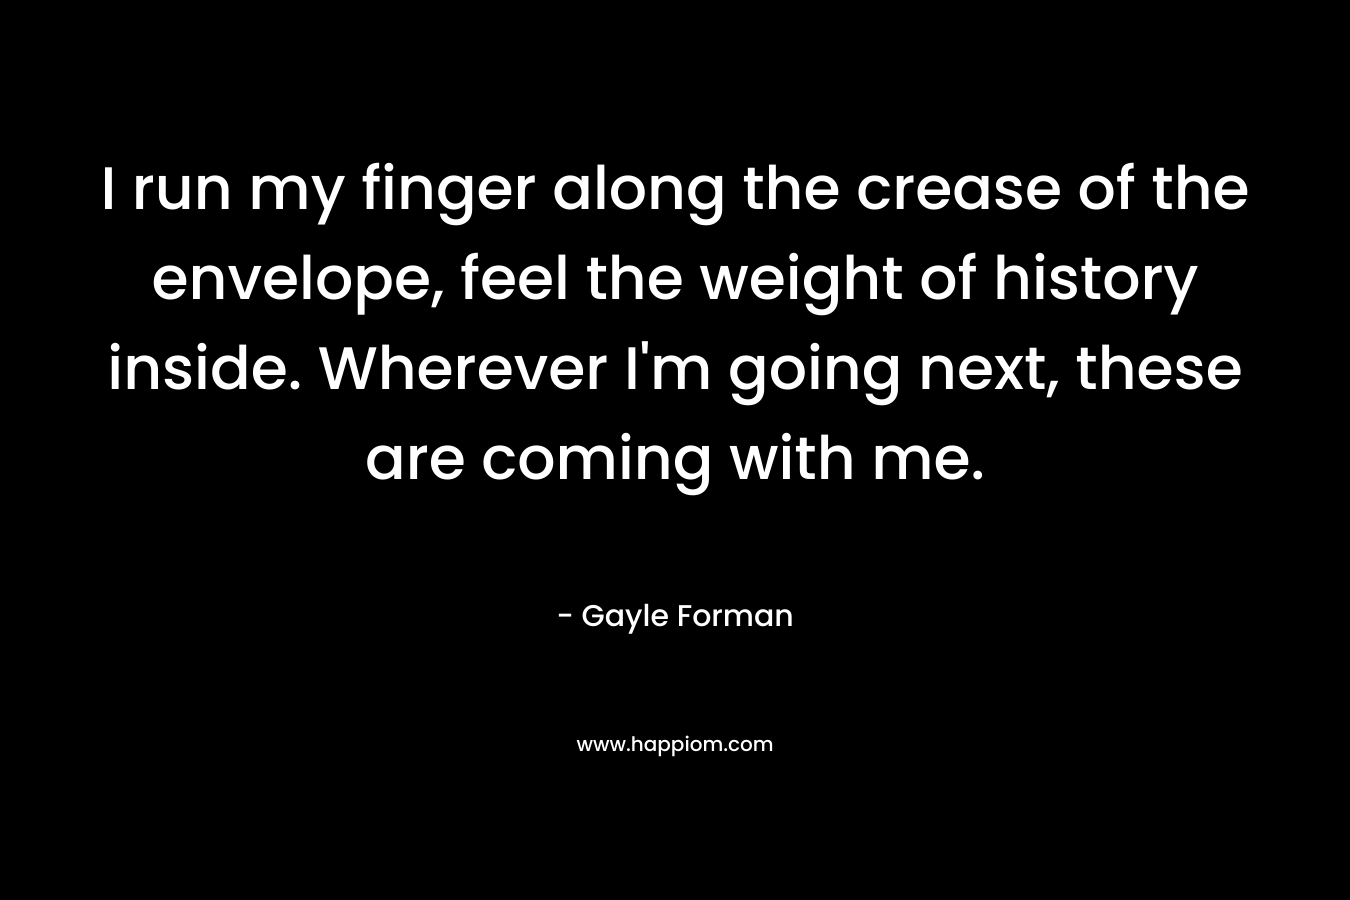 I run my finger along the crease of the envelope, feel the weight of history inside. Wherever I’m going next, these are coming with me. – Gayle Forman